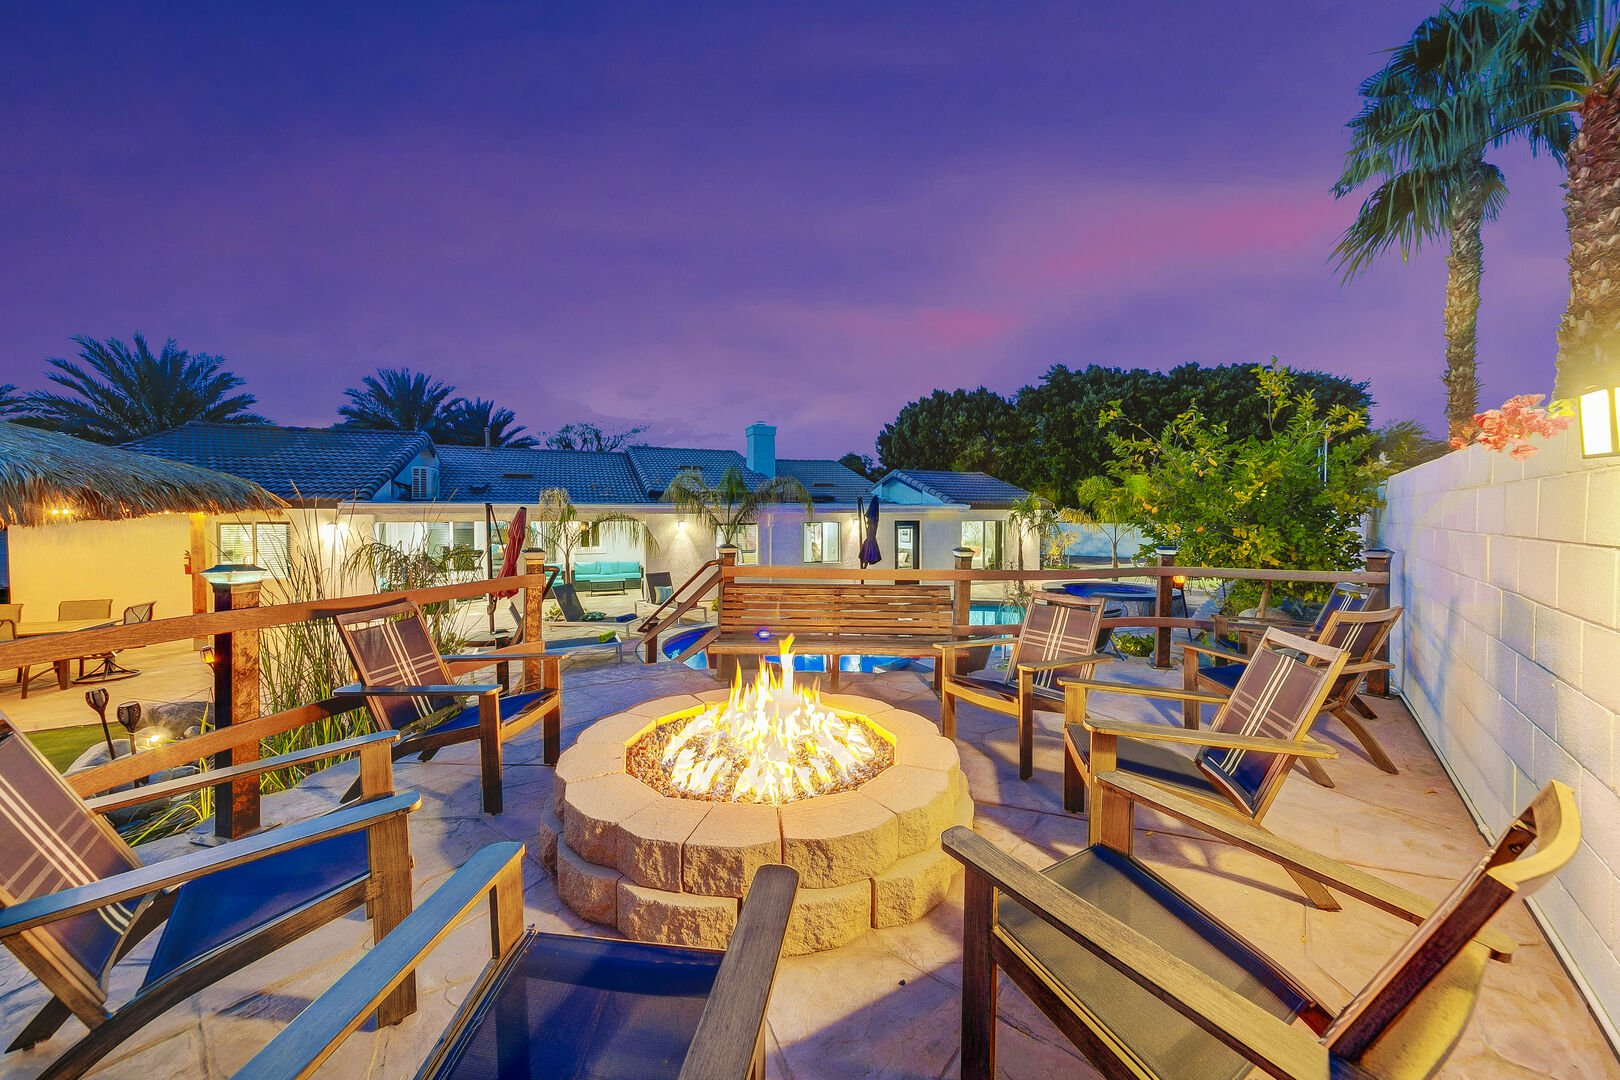 Enjoy a cozy night sharing memories around the outdoor fire pit with seating for 10.